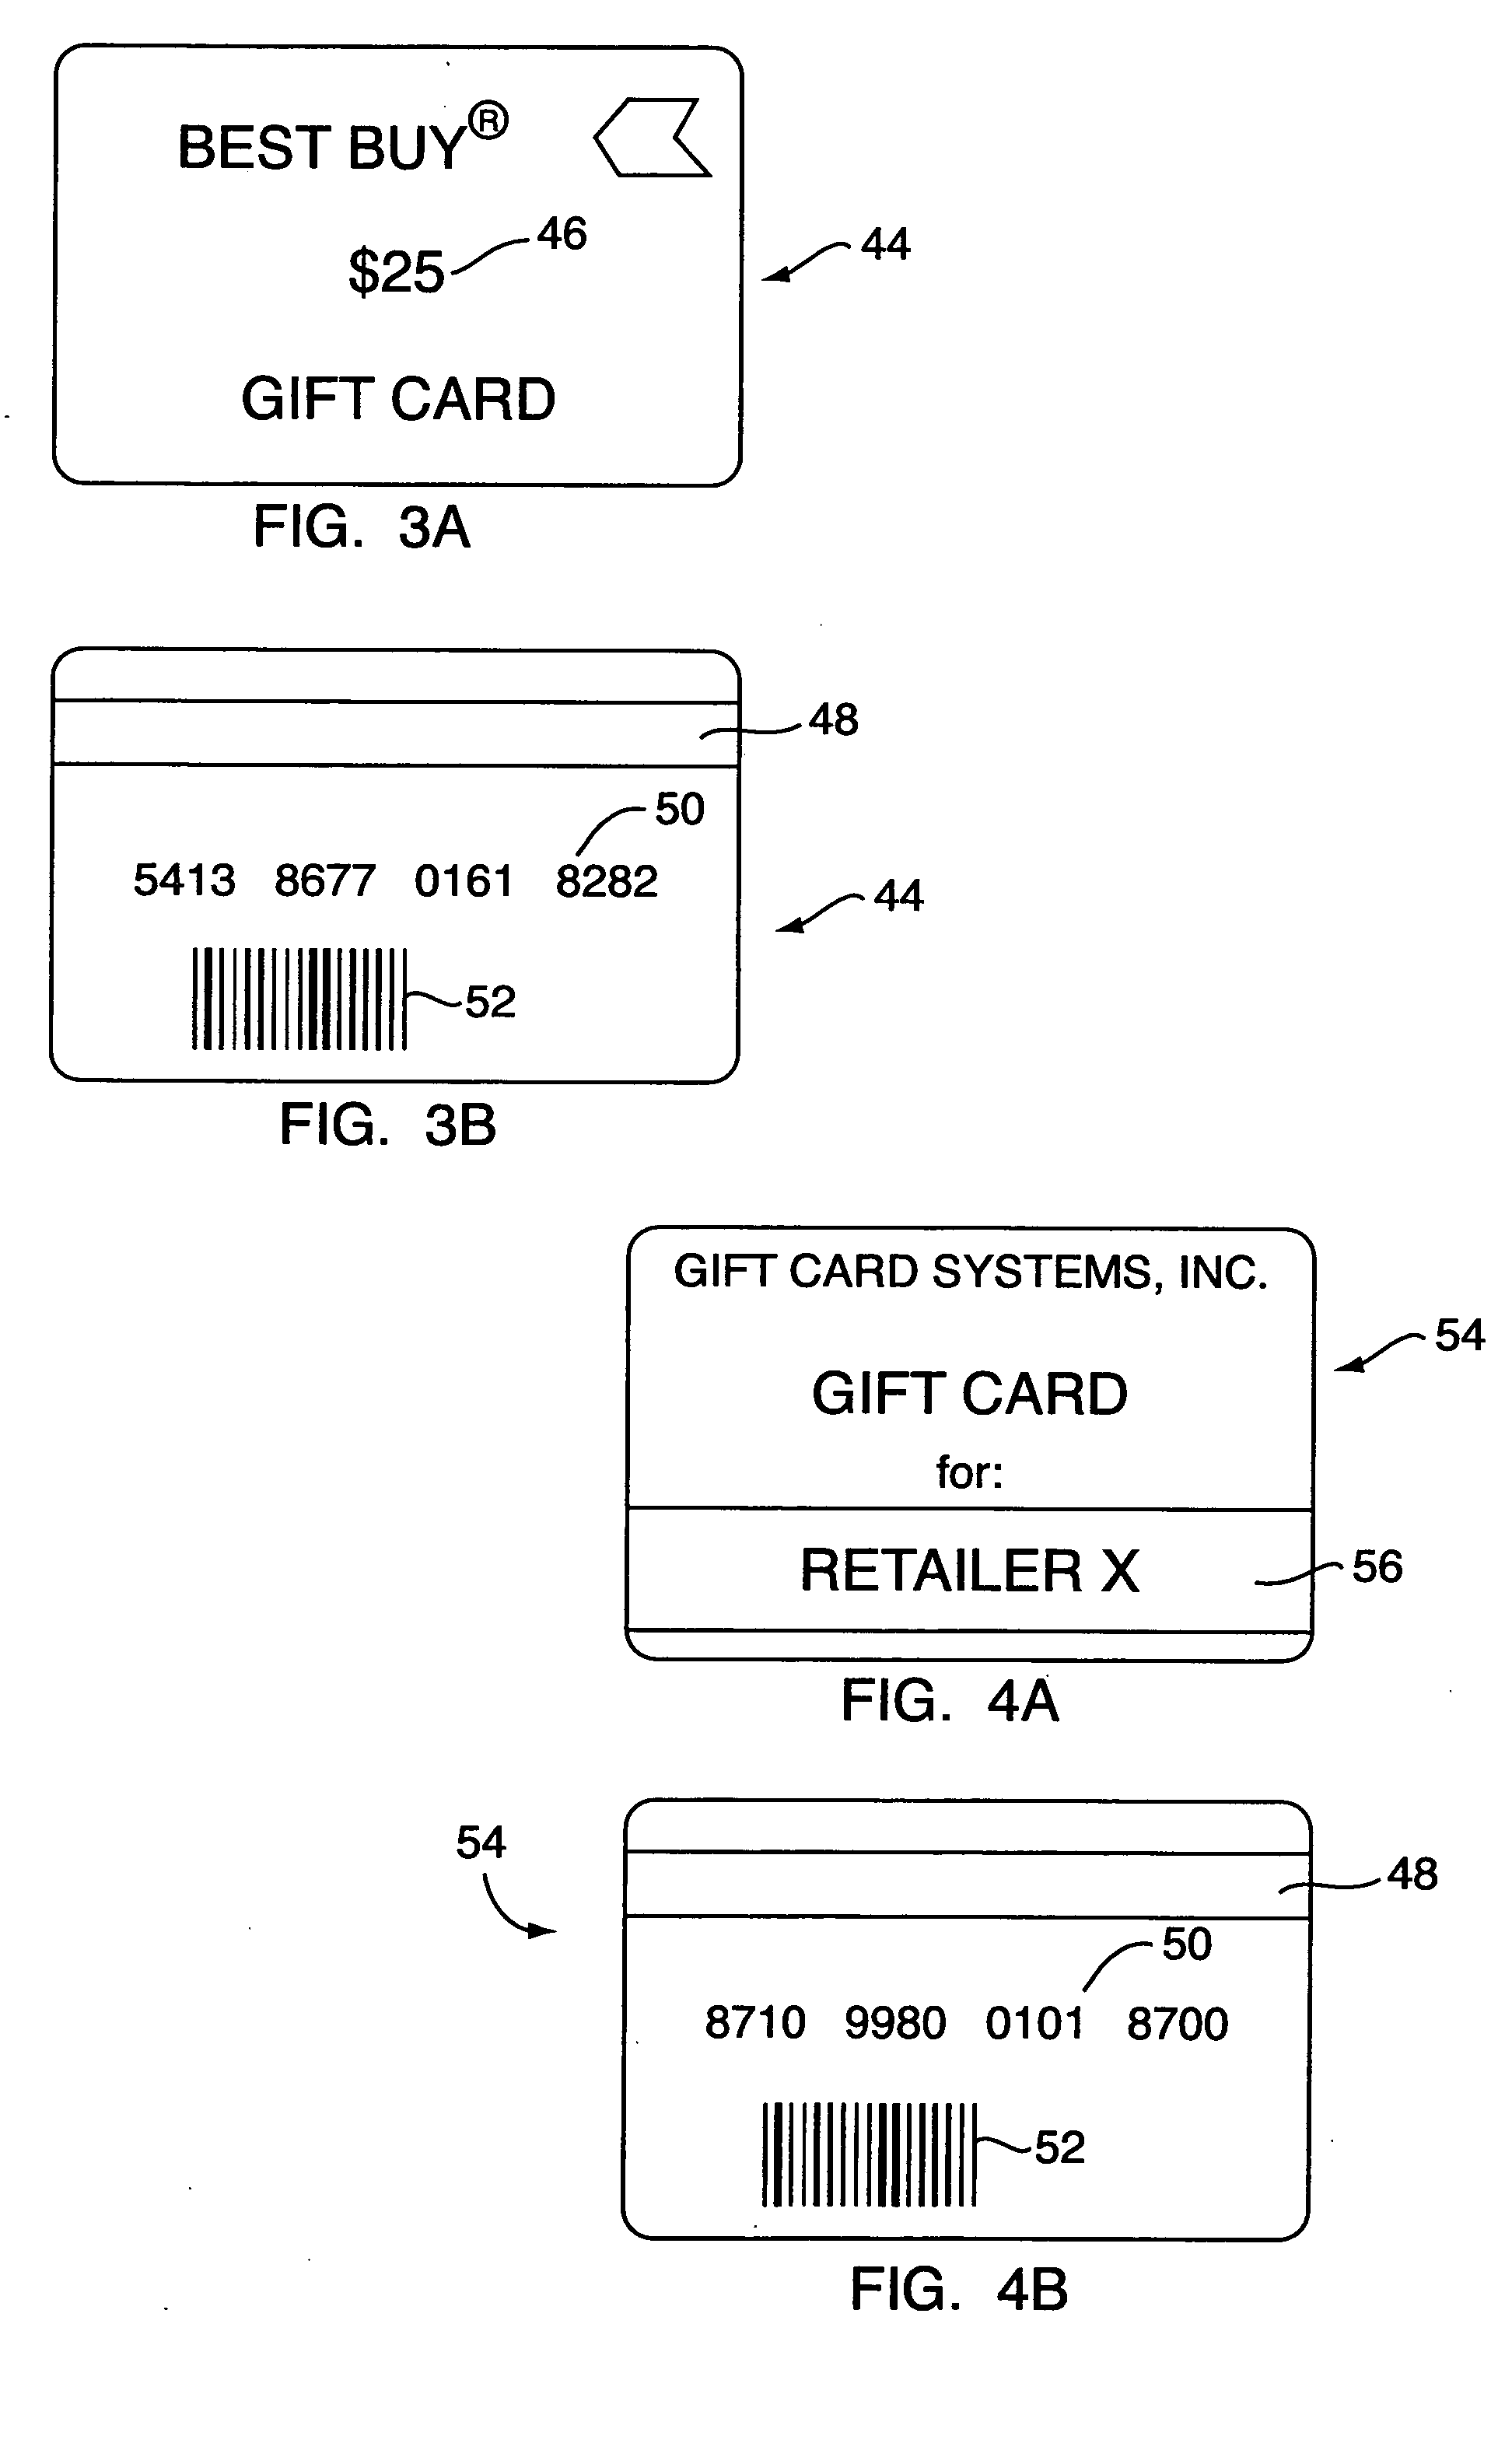 Self-service gift card dispensing terminal and method of use